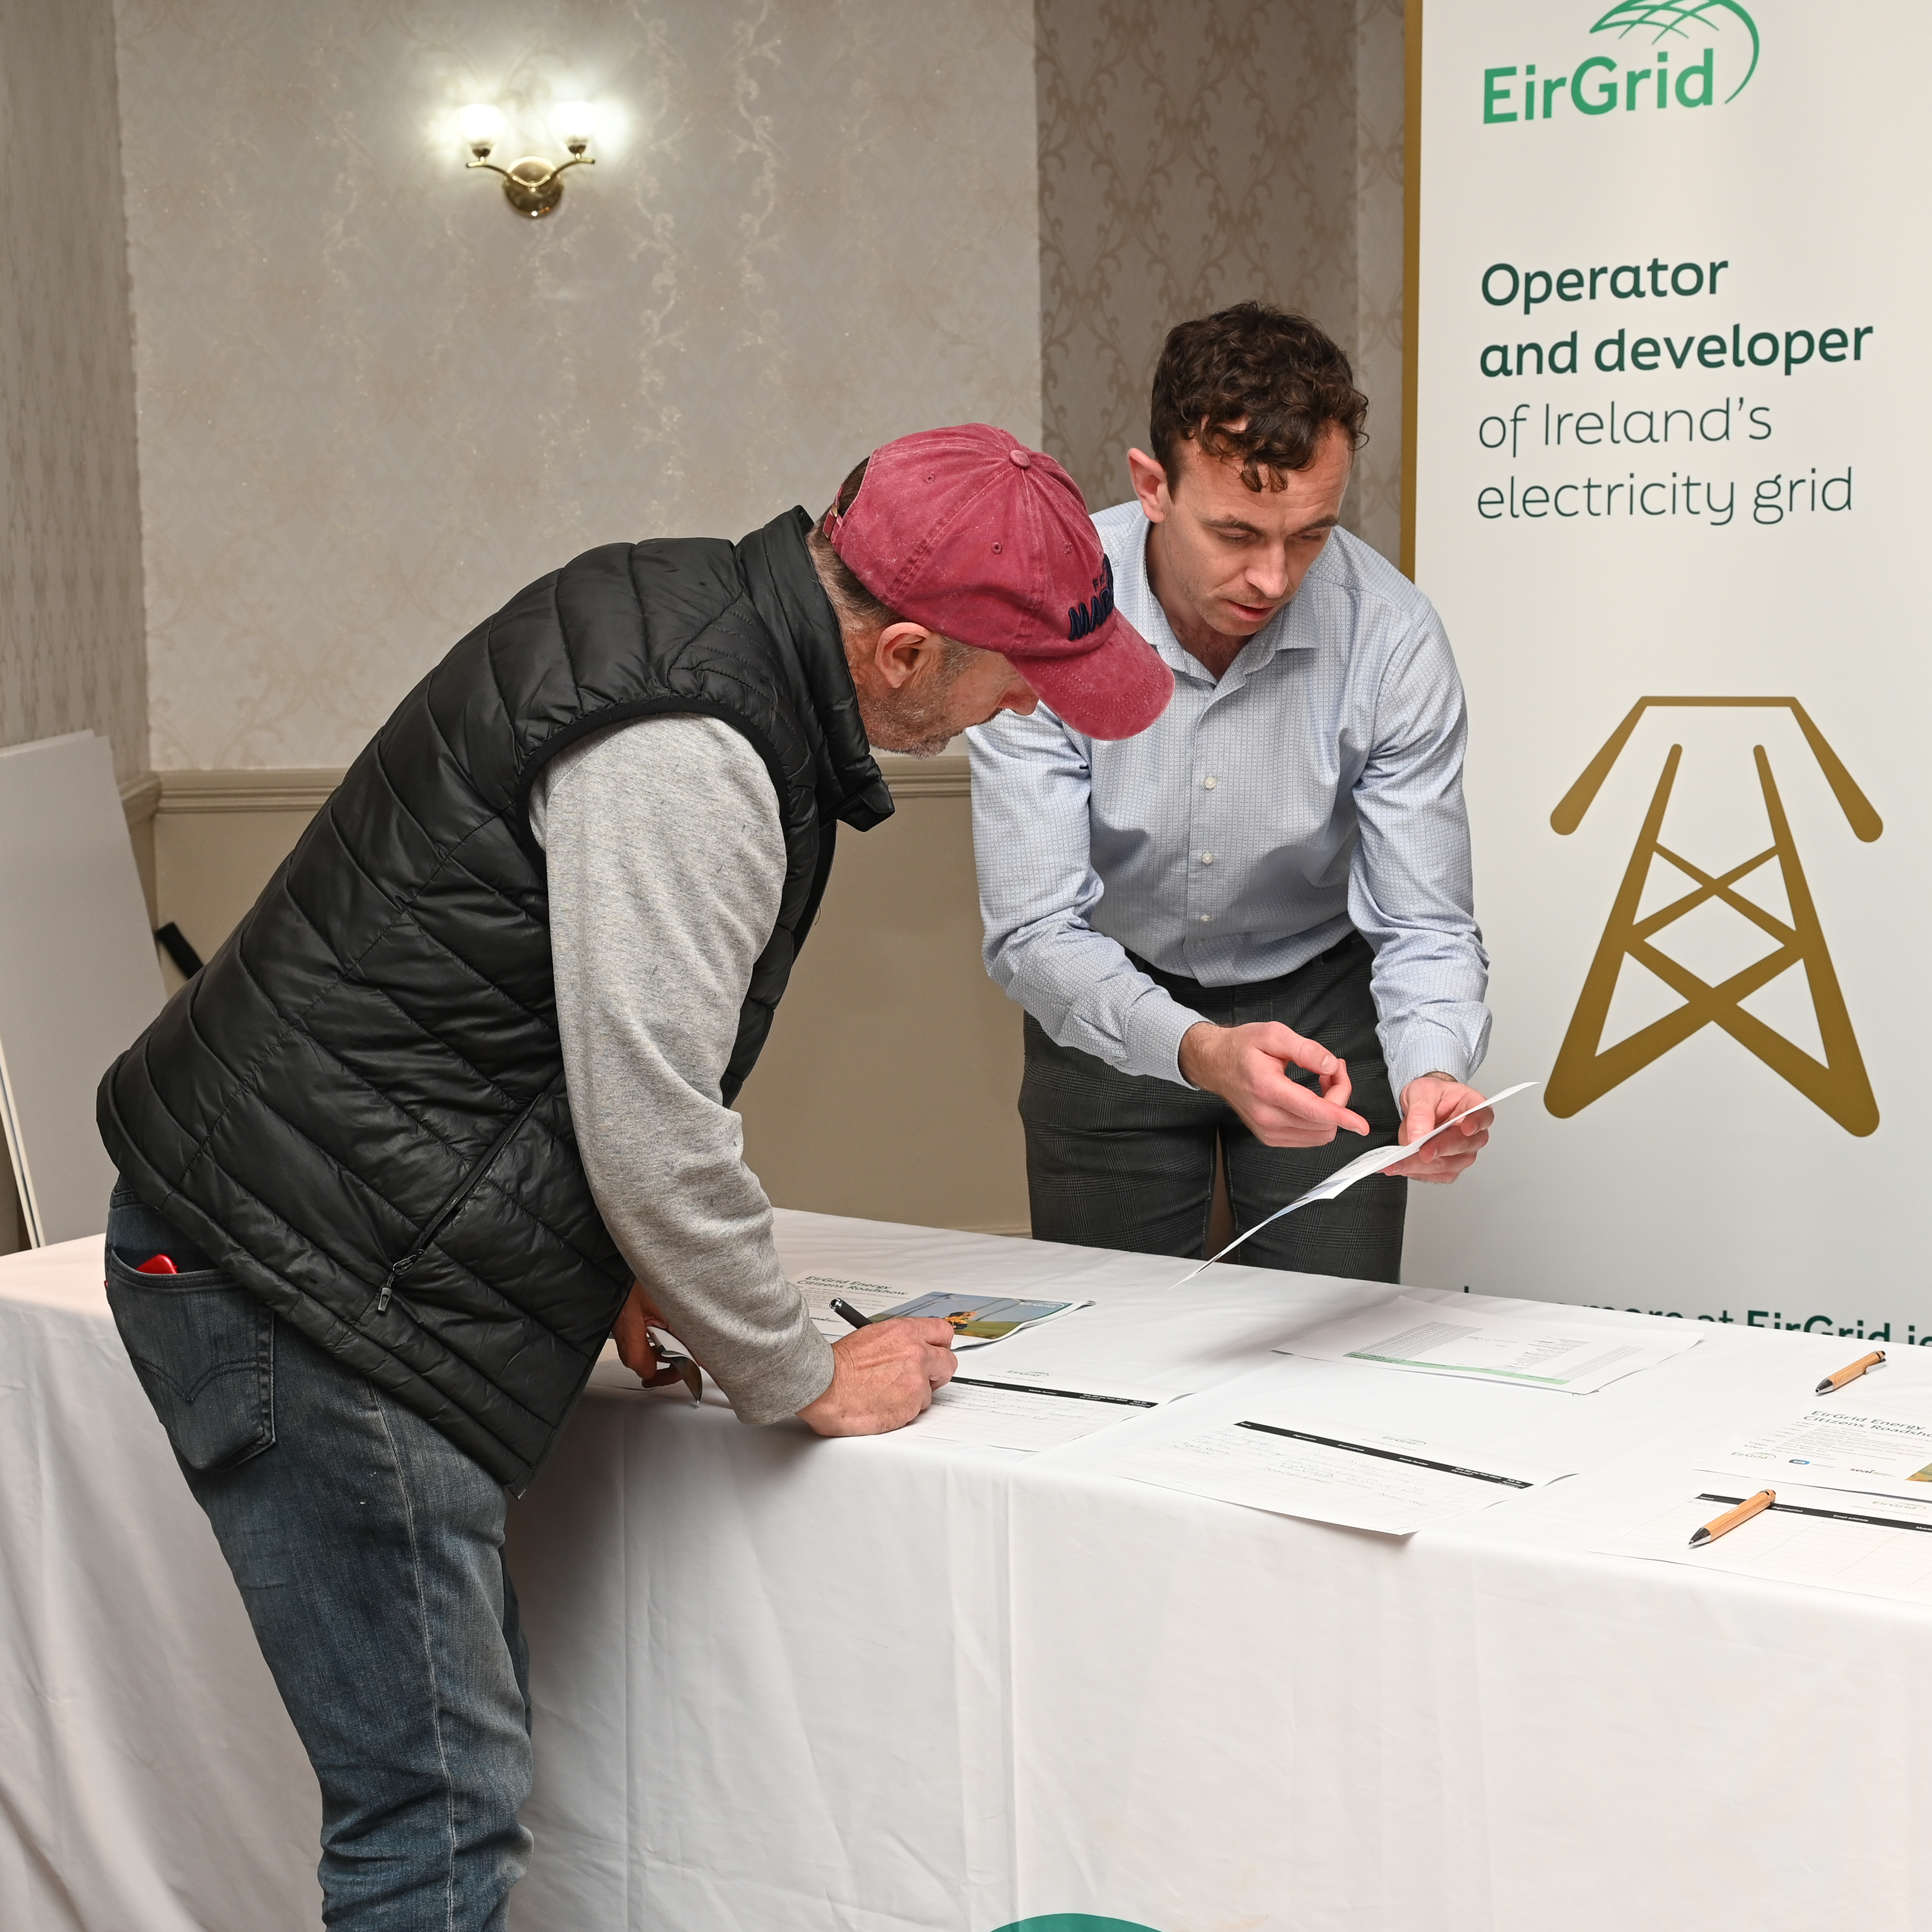 A member of the public visits an EirGrid information stand